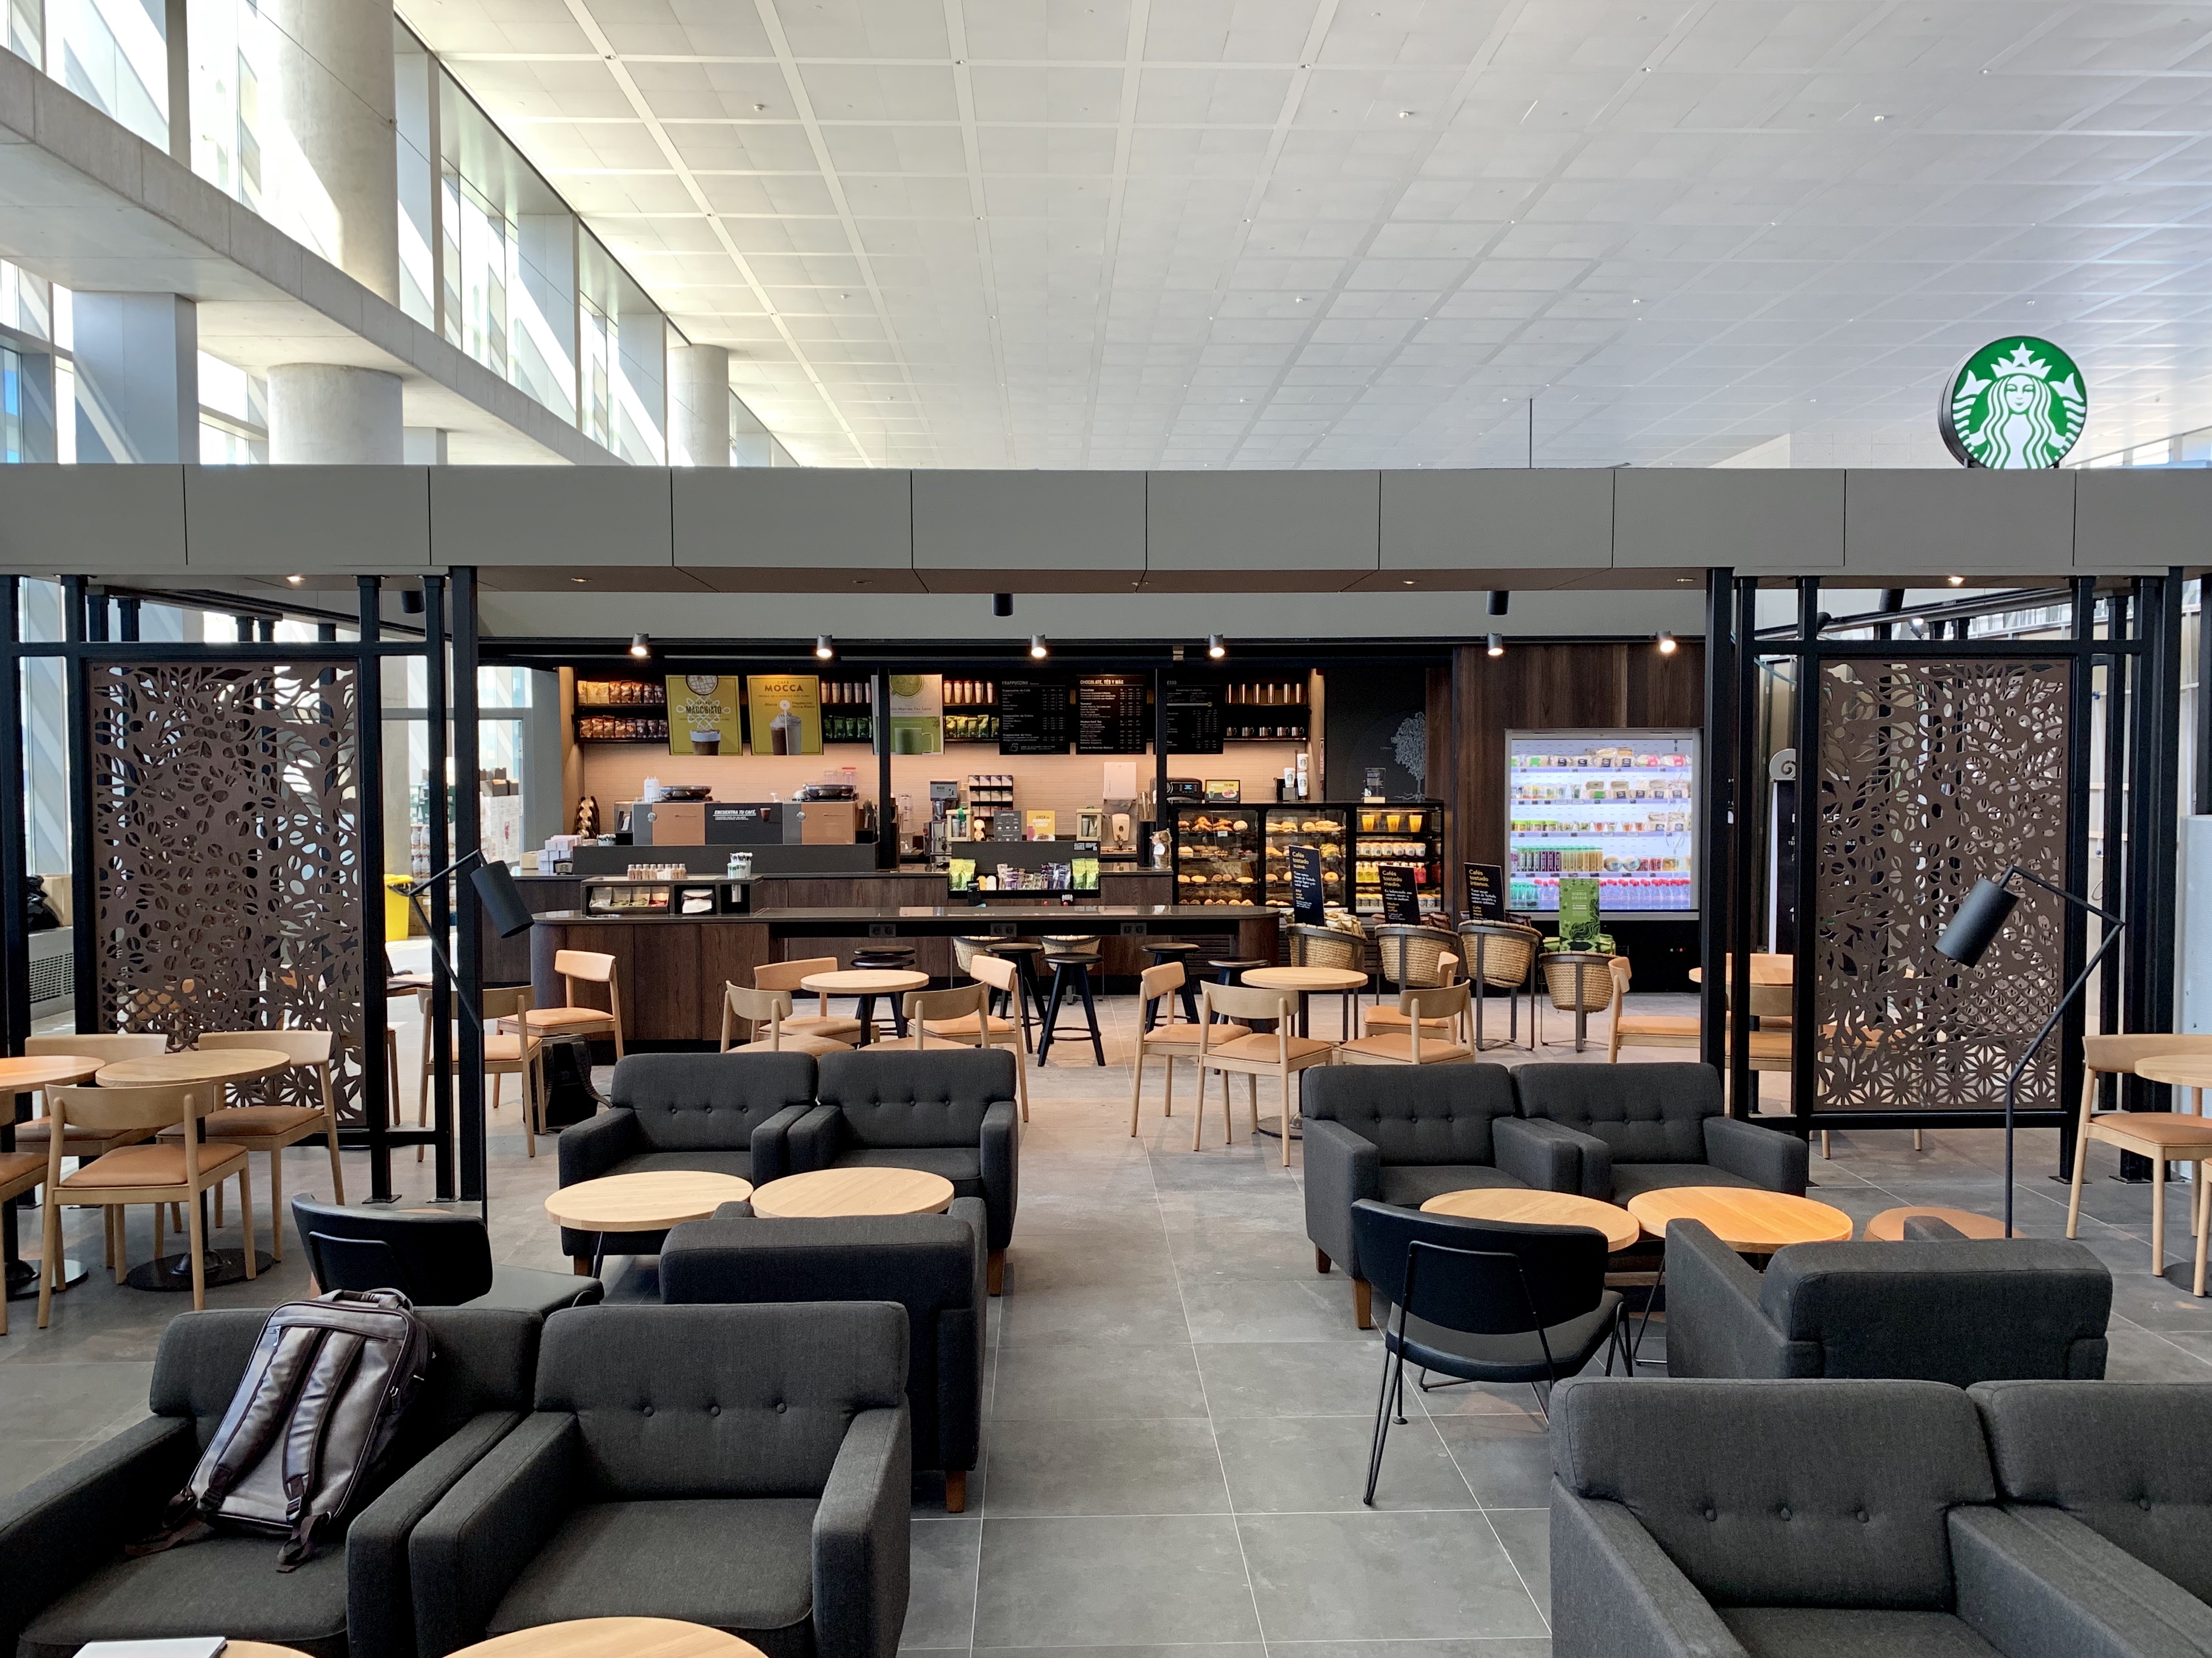 SSP brings six food and beverage units including Jamie’s Deli to Malaga Costa del Sol International Airport